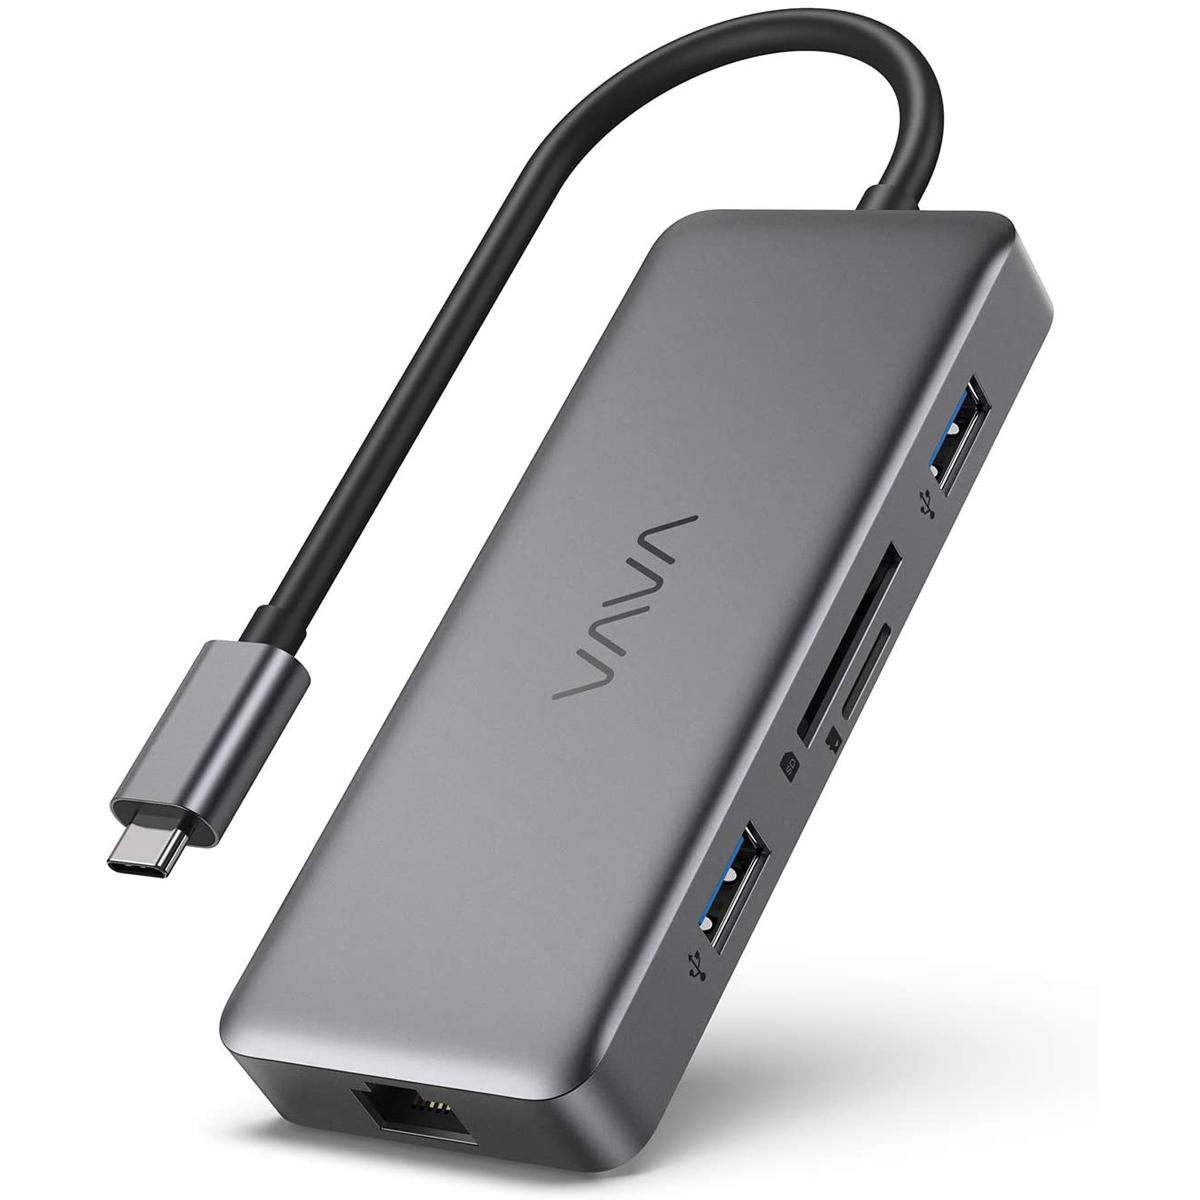 Vava 8-in-1 USB C Hub with HDMI and Ethernet for $26.99 Shipped